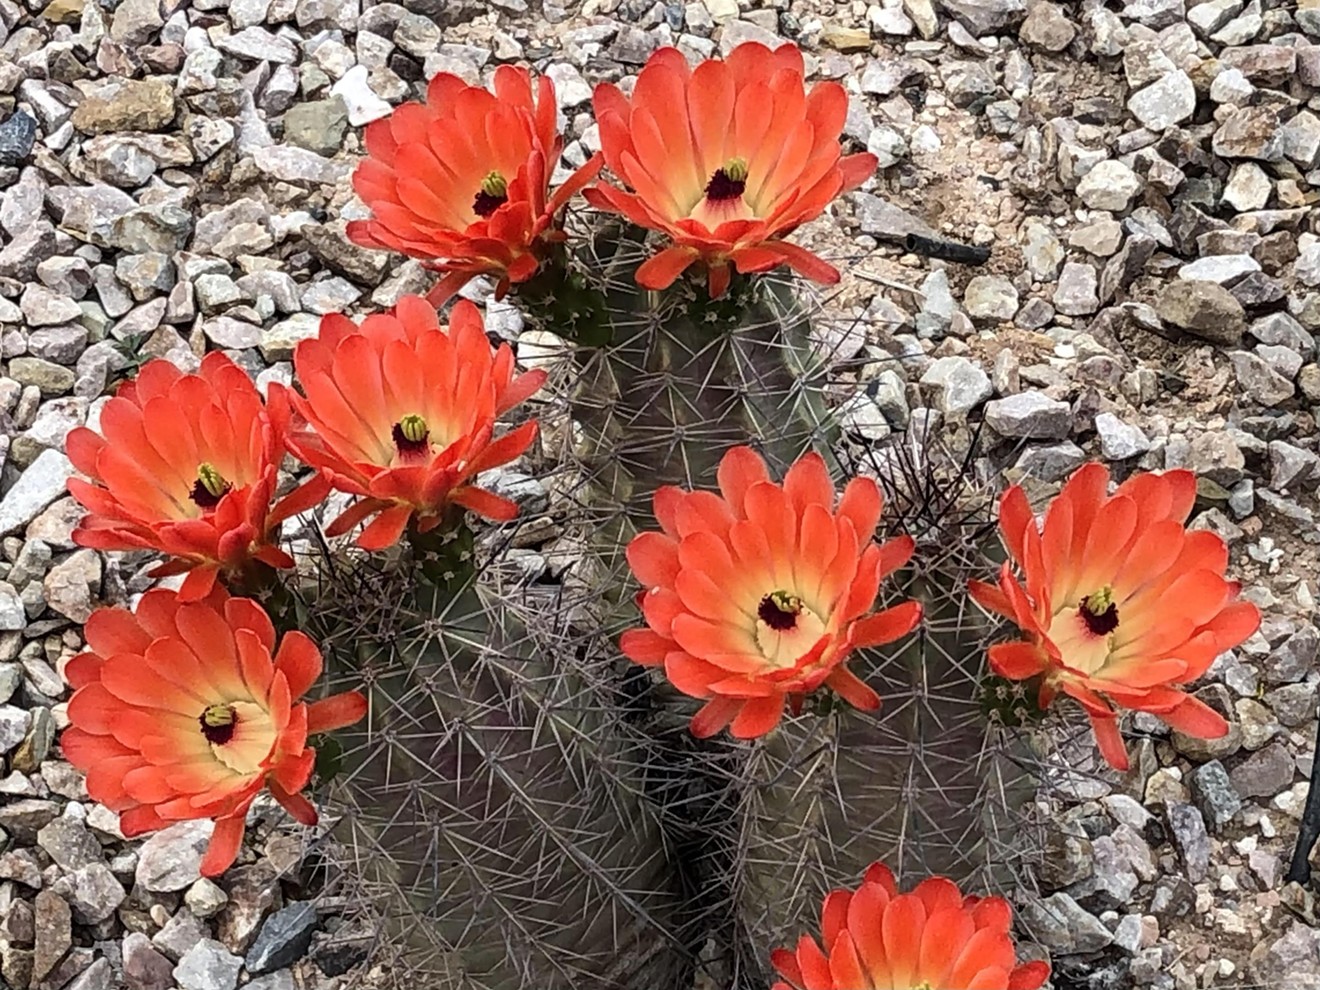 Spring flowers bloom at the Desert Botanical Garden, one of the Phoenix attractions that participate in the Culture Pass program.